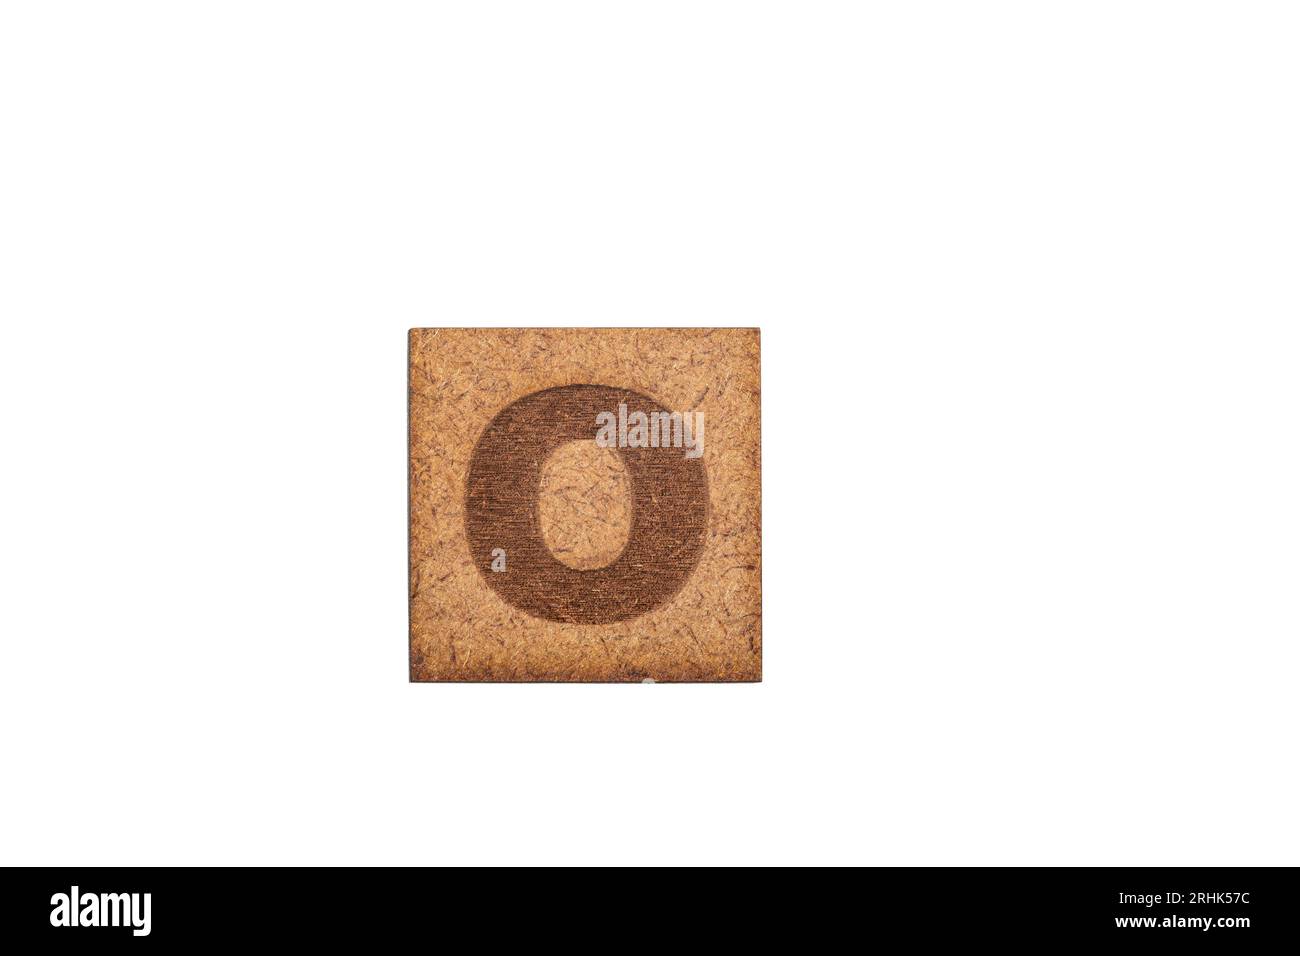 Capital Letter In Square Wooden Tiles - Letter O, On White Background. Stock Photo